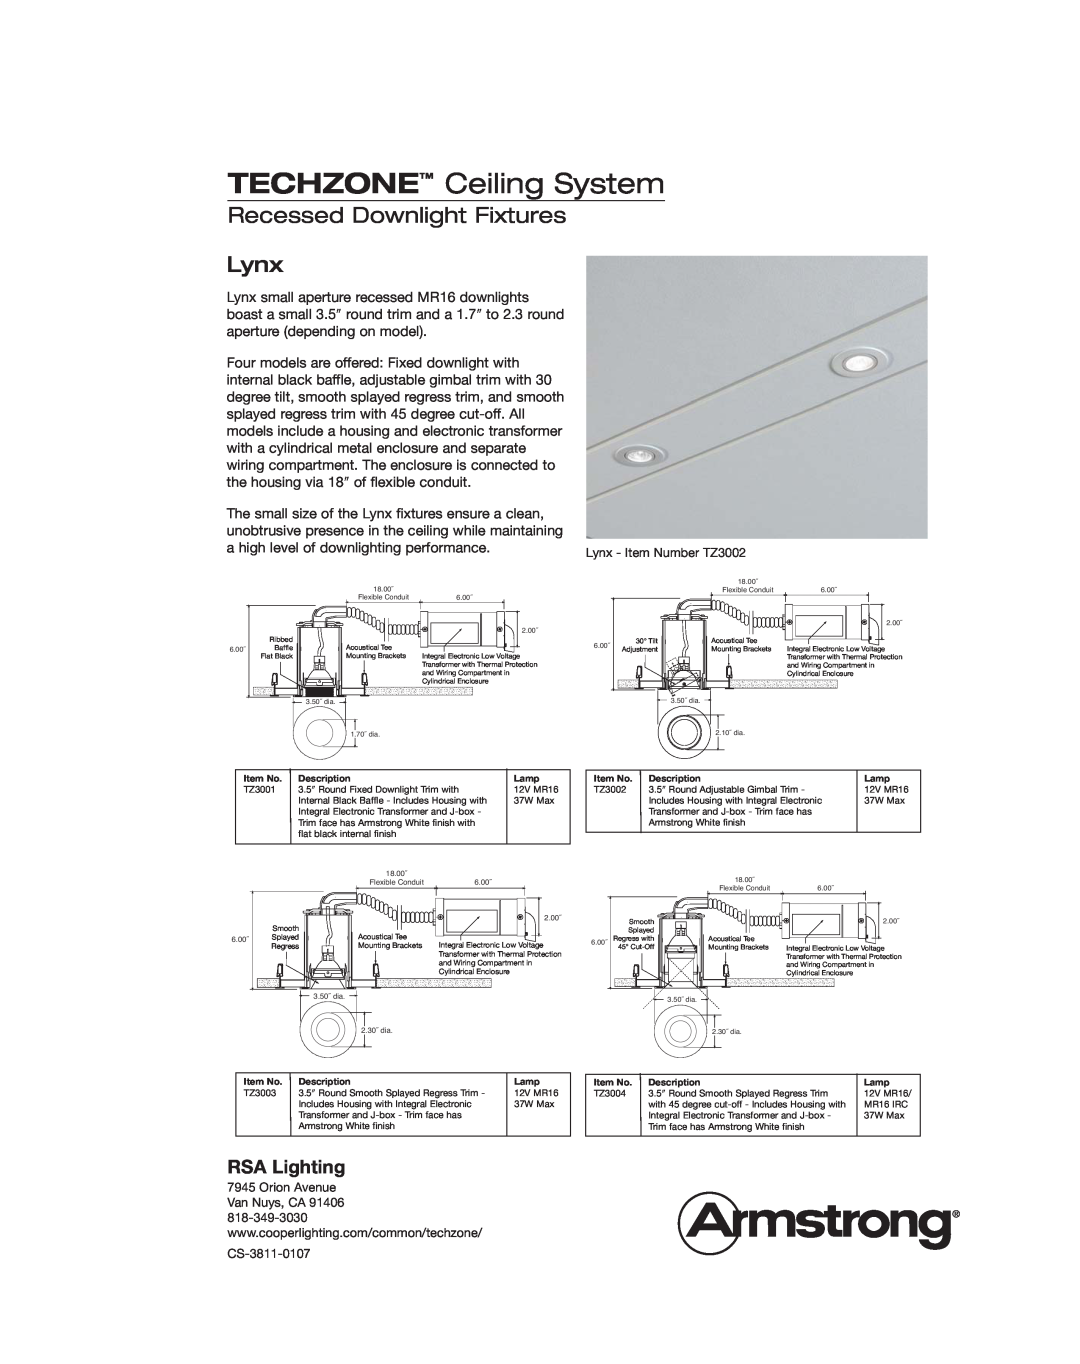 Cooper Lighting Ceiling Systems manual Recessed Downlight Fixtures Lynx, TECHZONE Ceiling System, RSA Lighting 